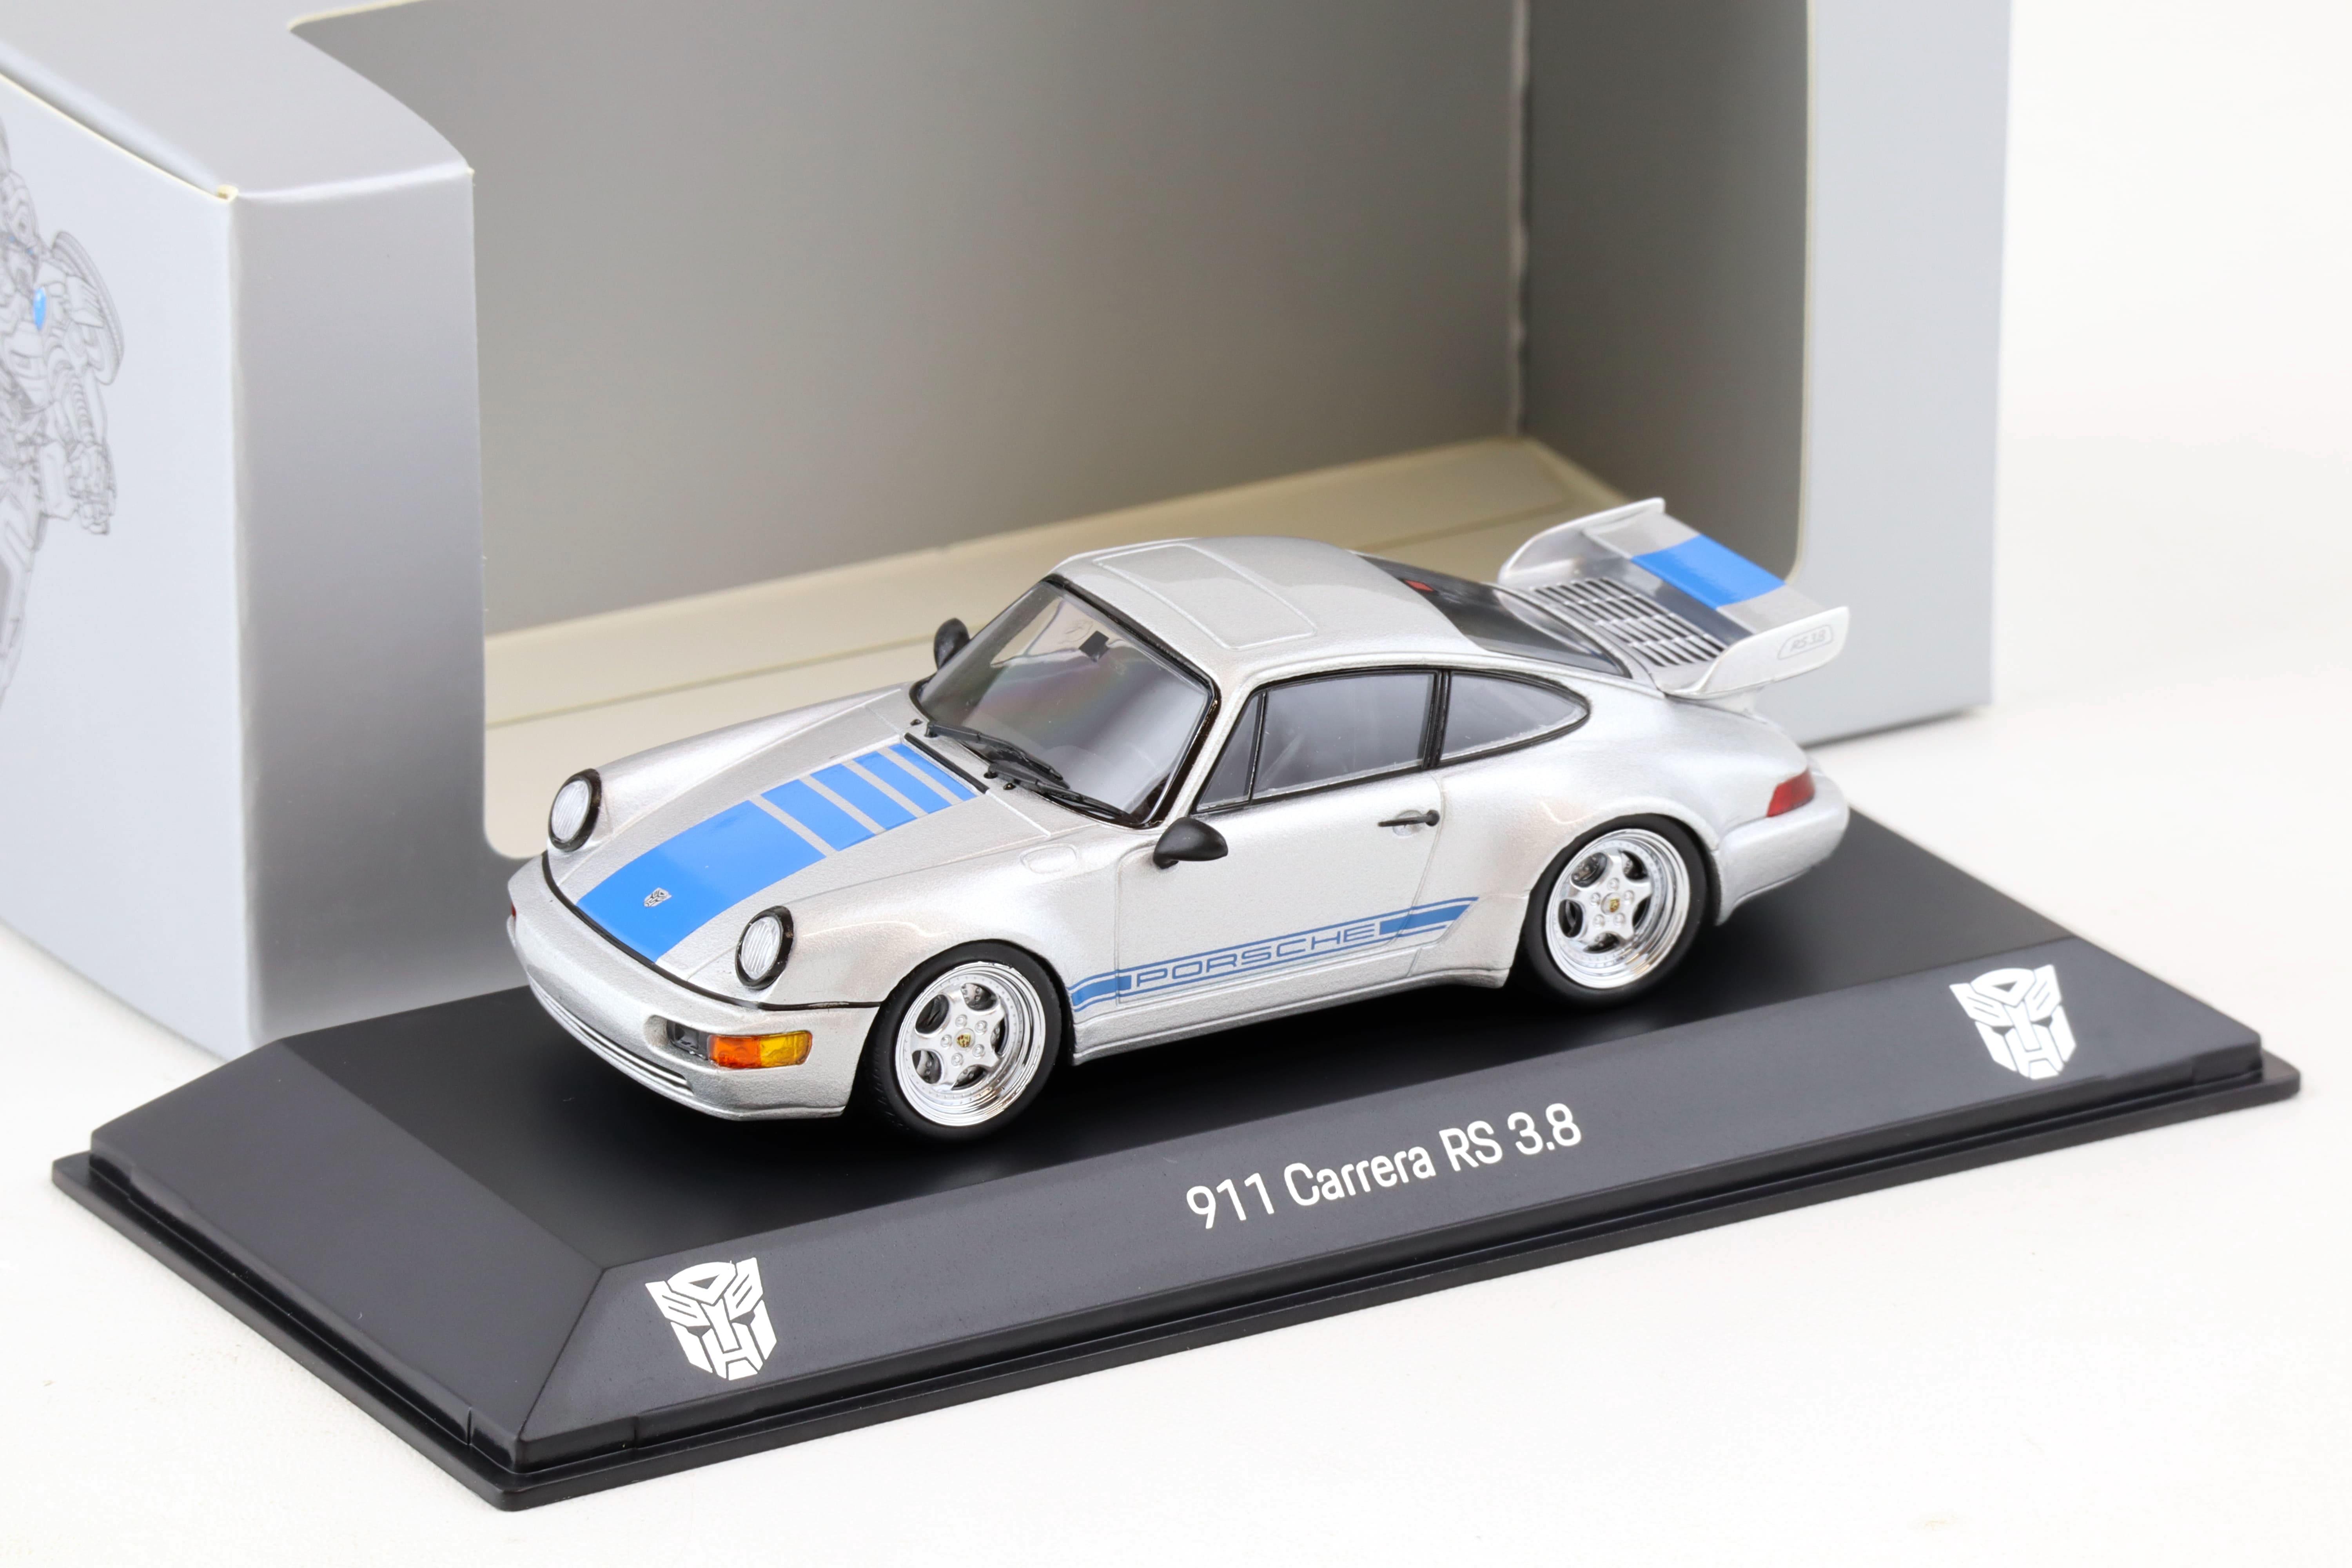 911 Carrera RS 3.8 'Mirage' - Transformers Collection